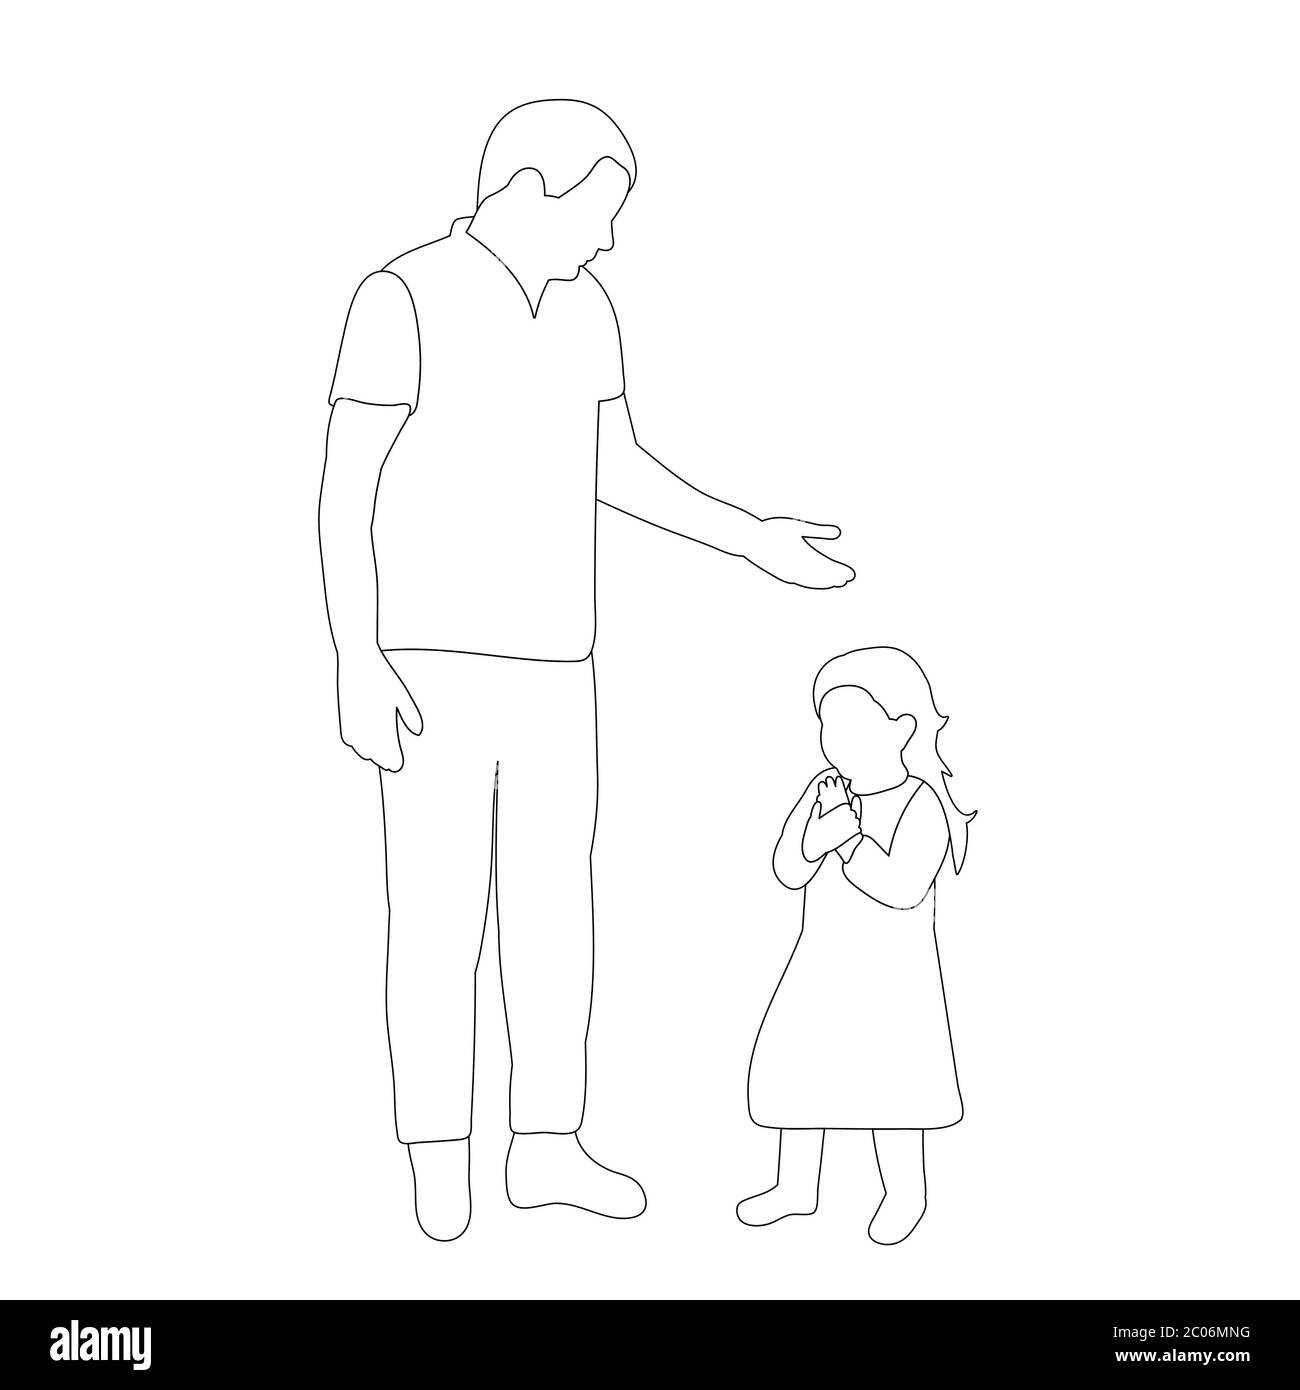 Father's day pencil sketch | Father and Daughter love | Pencil drawing |  Happy father's day | Materials used ▭▭▭▭▭▭ 1. Graphite Pencil (2B and 4B)  2. Eraser 3.Blending Stump (You can